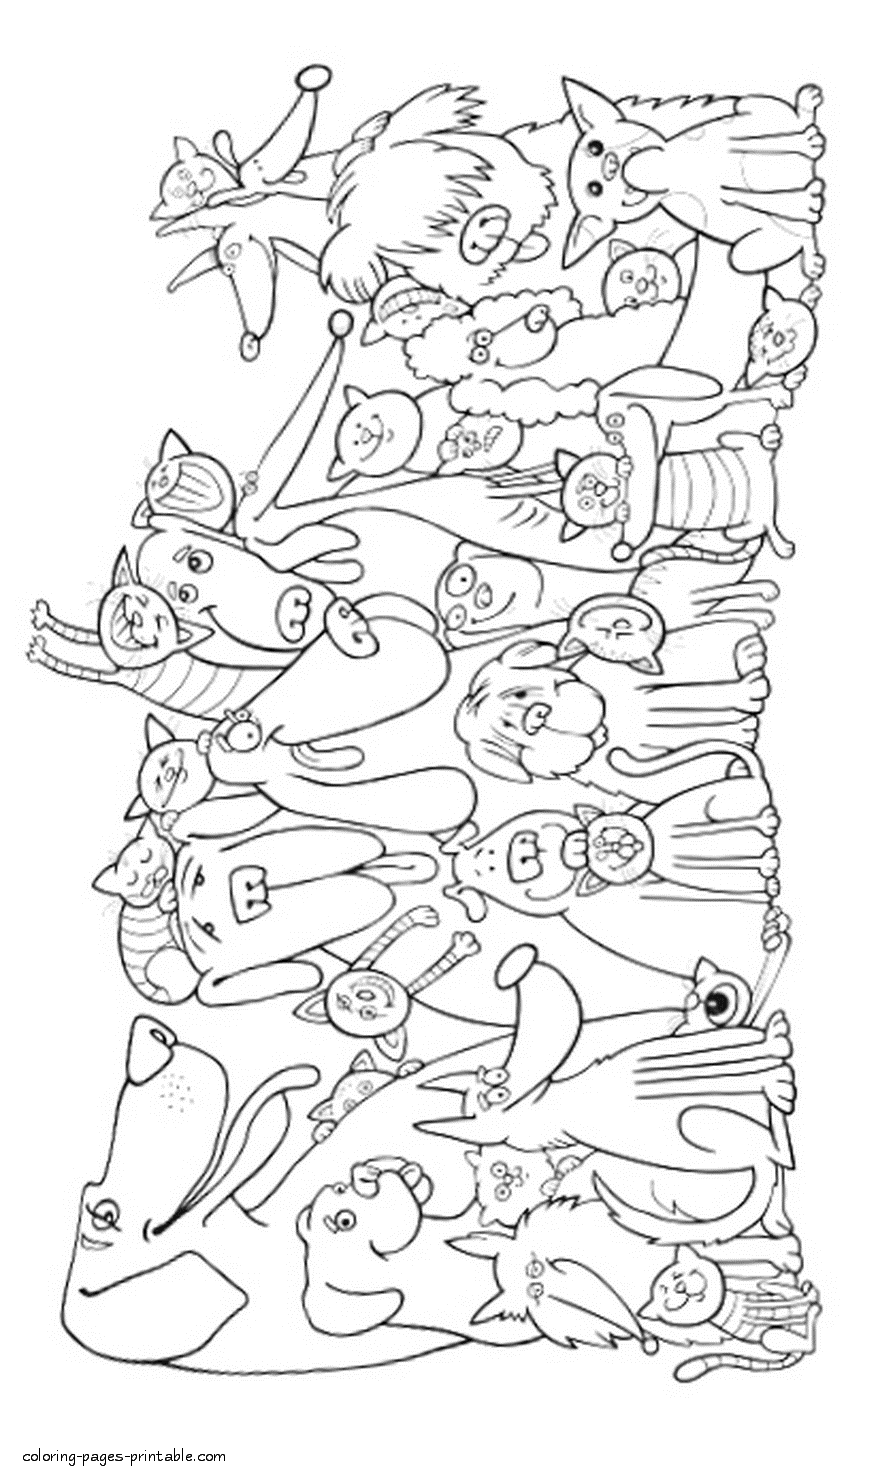 Cats and dogs coloring pages || COLORING-PAGES-PRINTABLE.COM